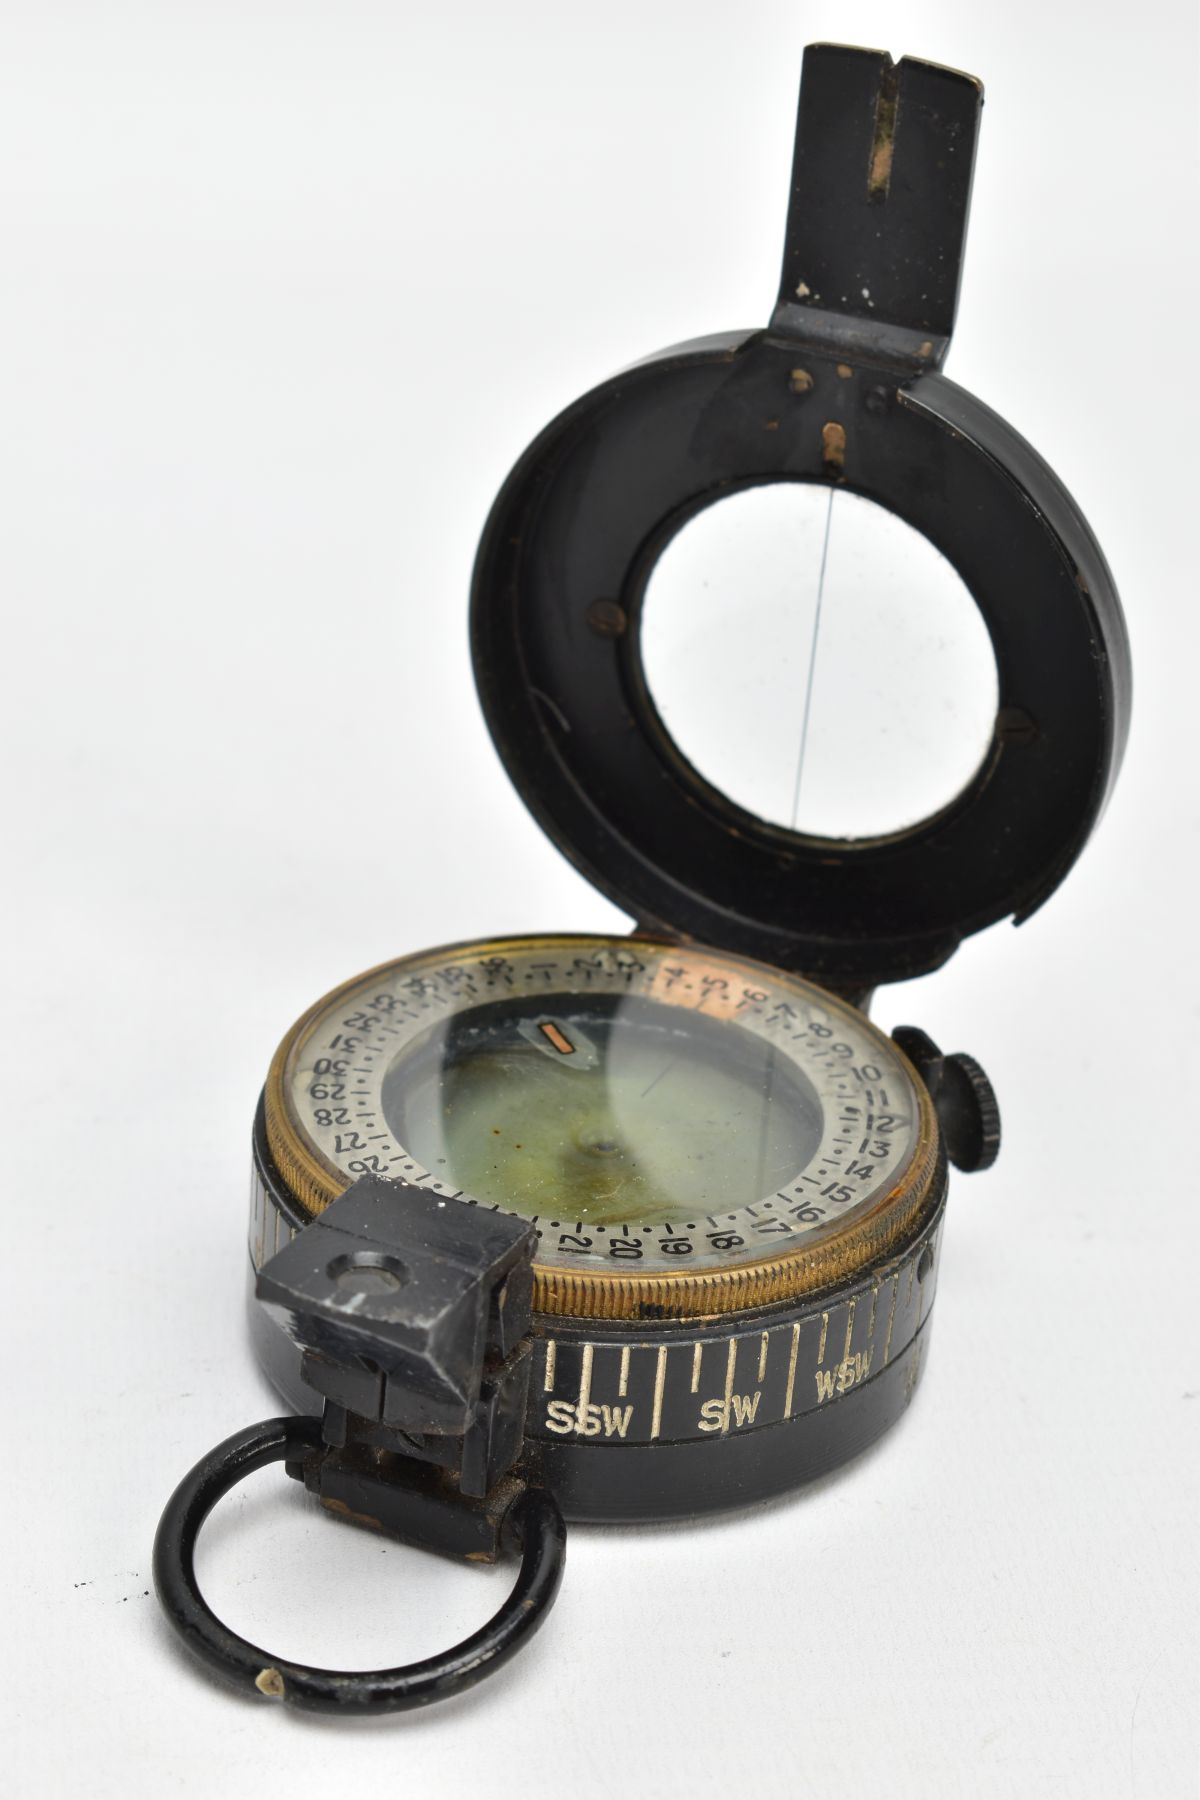 A MILITARY COMPASS, black compass, stamped T.G.C2 Ltd London number 234303, dated 1943 MK III - Image 3 of 7